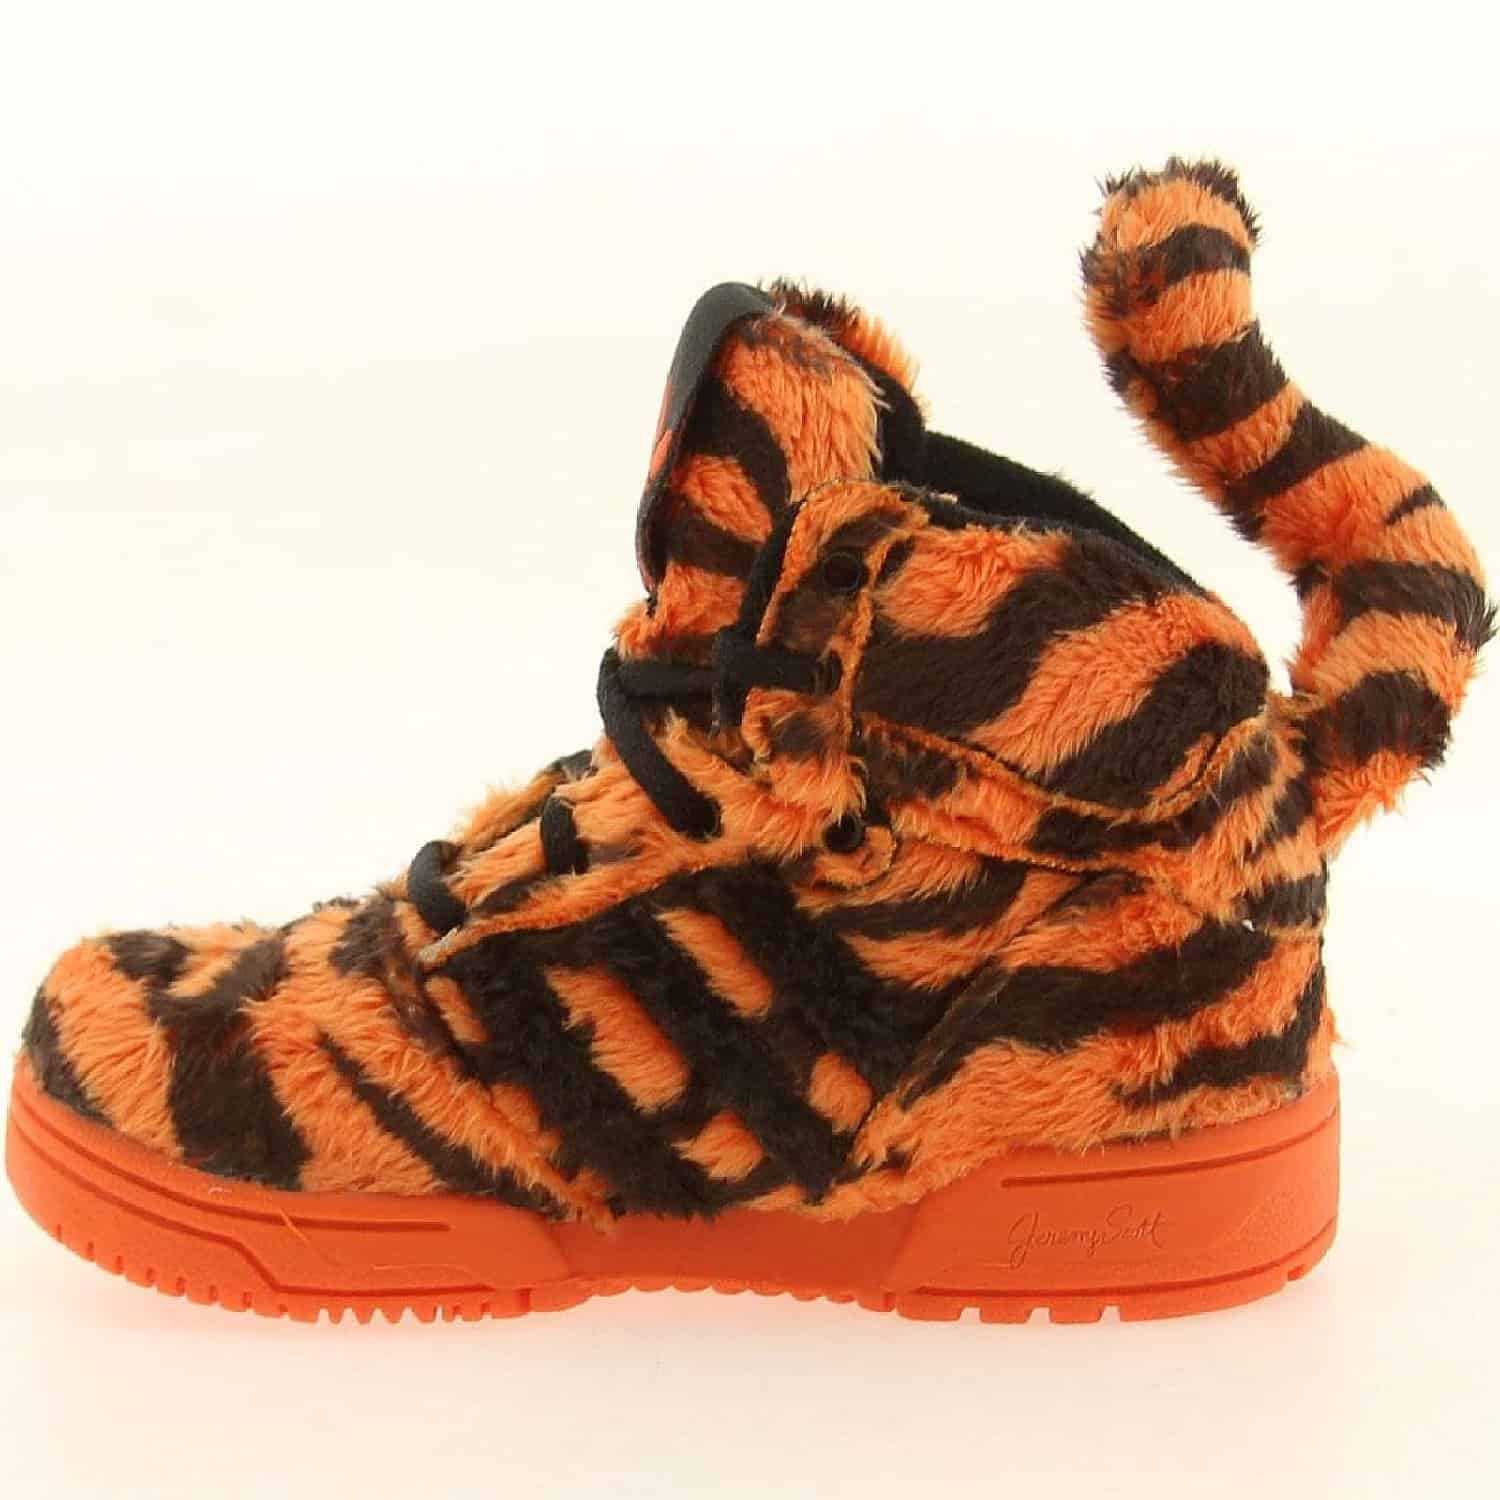 Adidas Jeremy Scott Tiger Unique Gift Idea for Toddlers